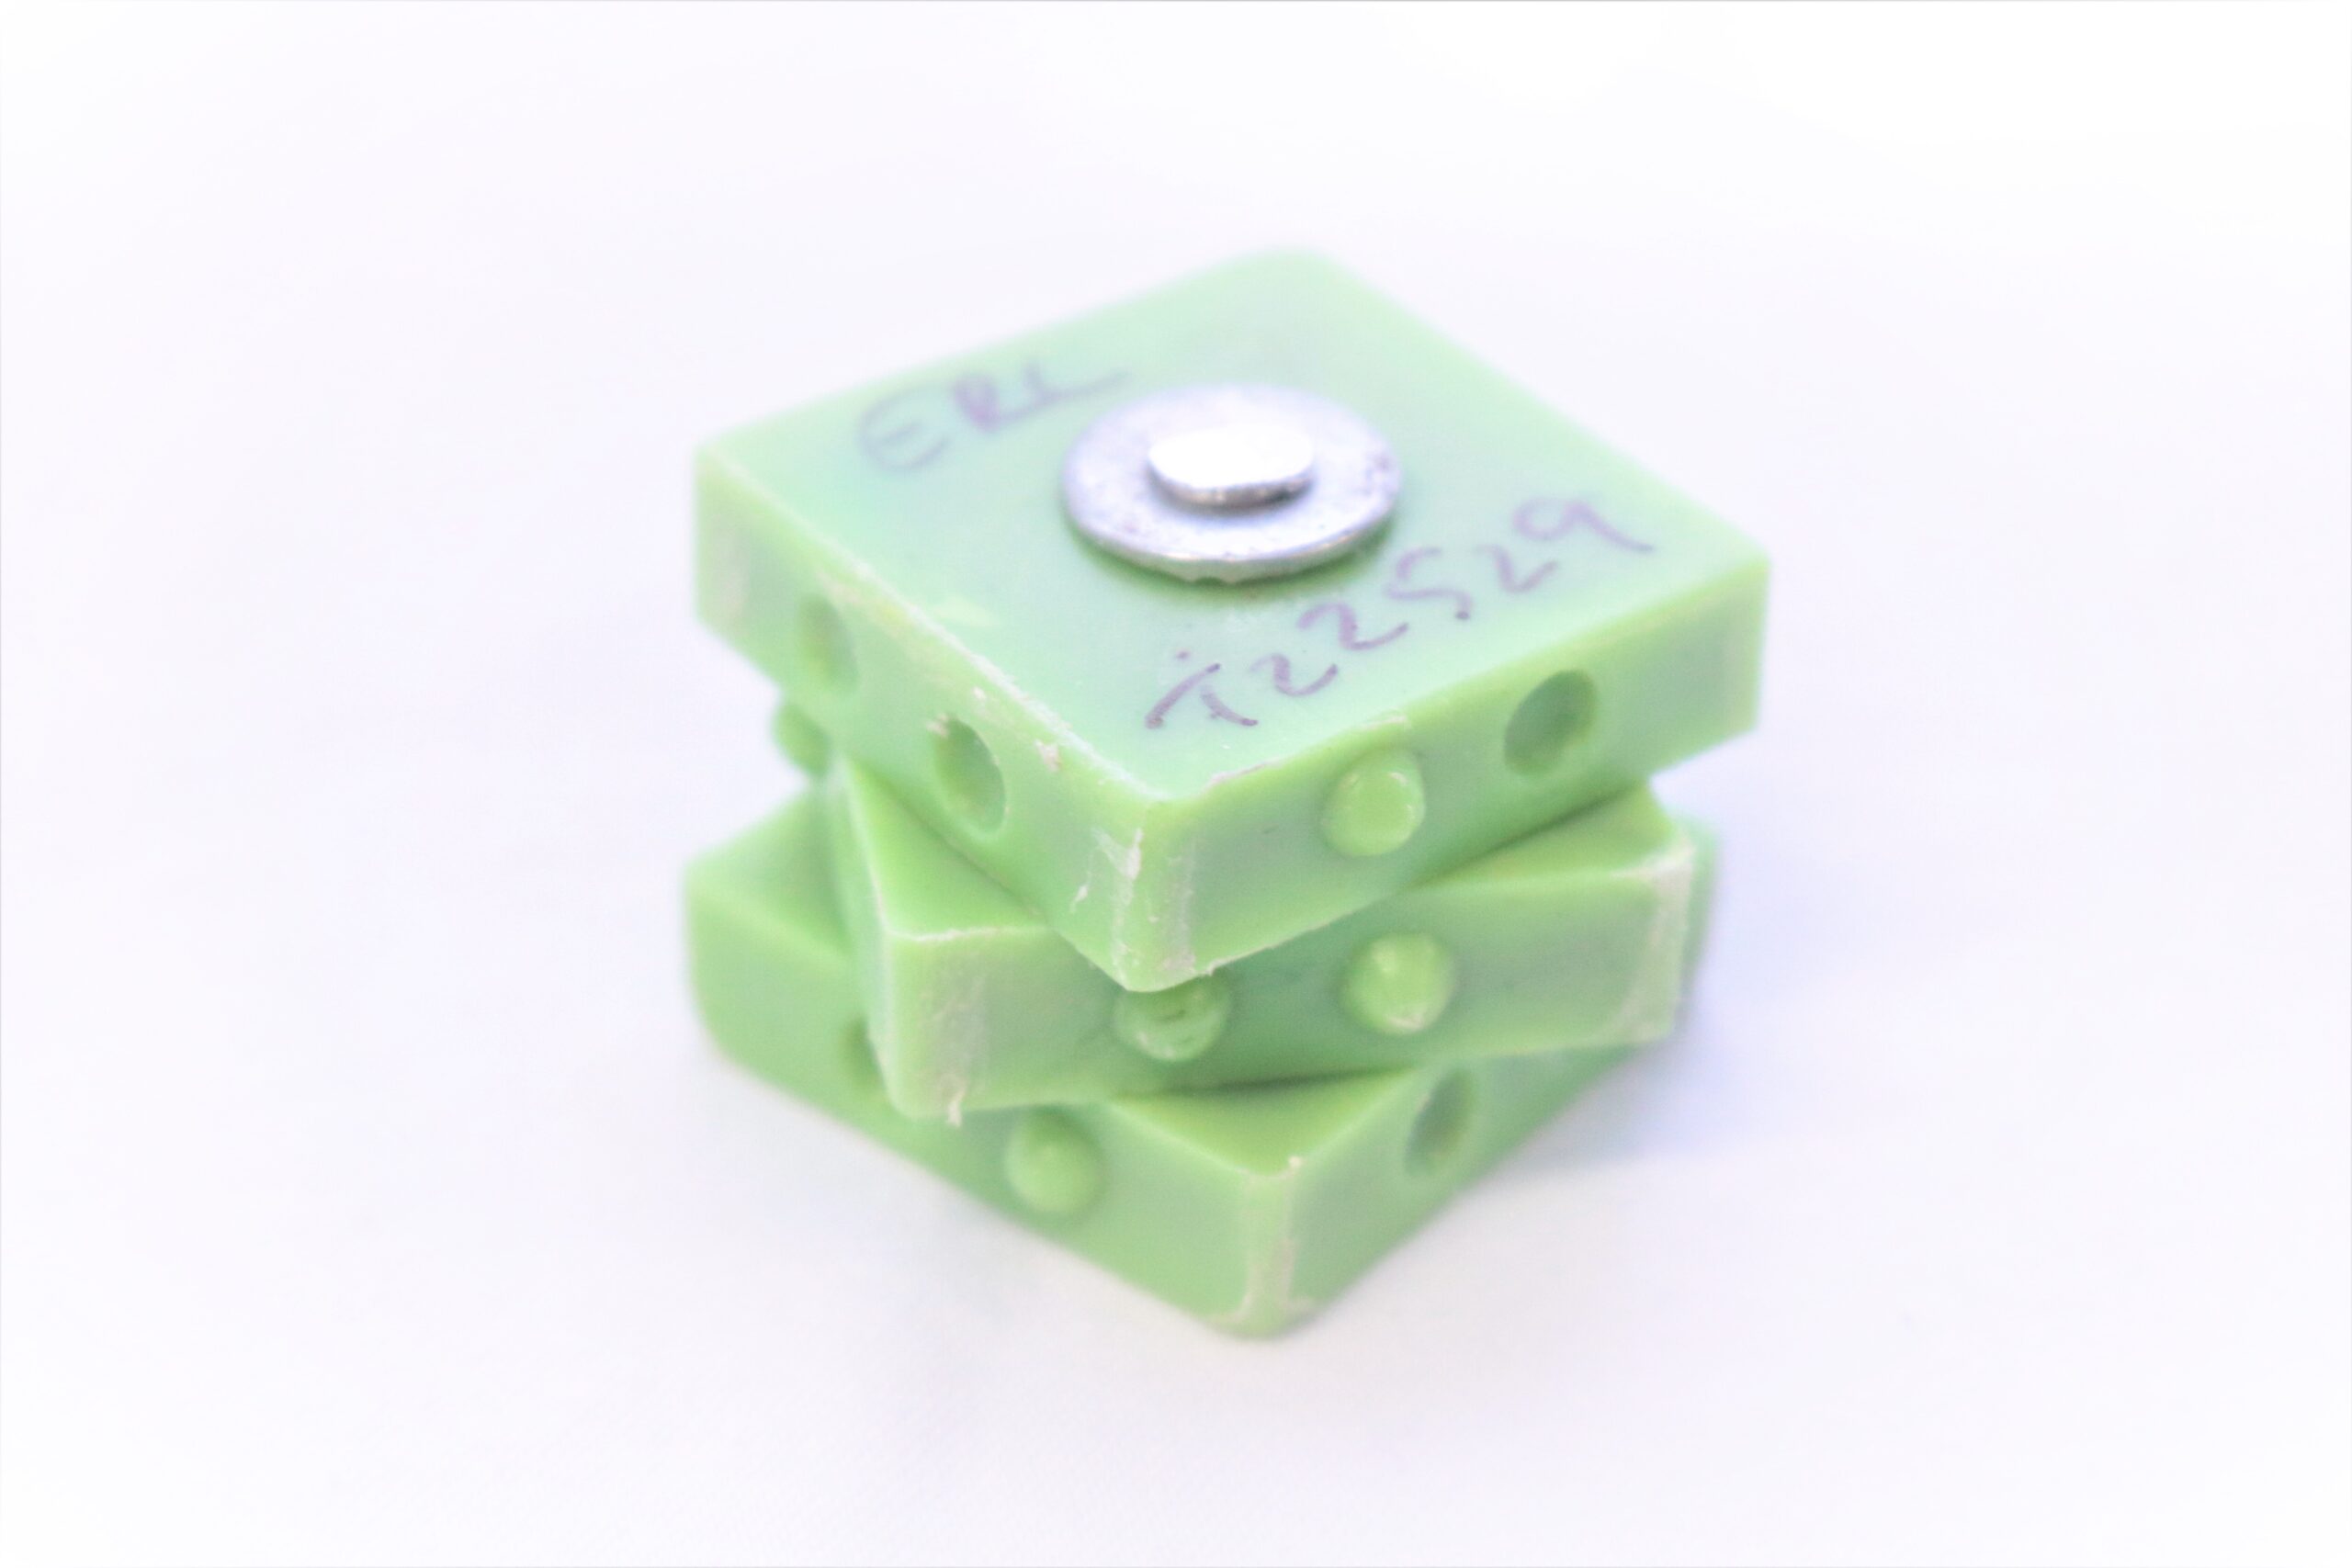 Pocket Braille Cube Learning Device